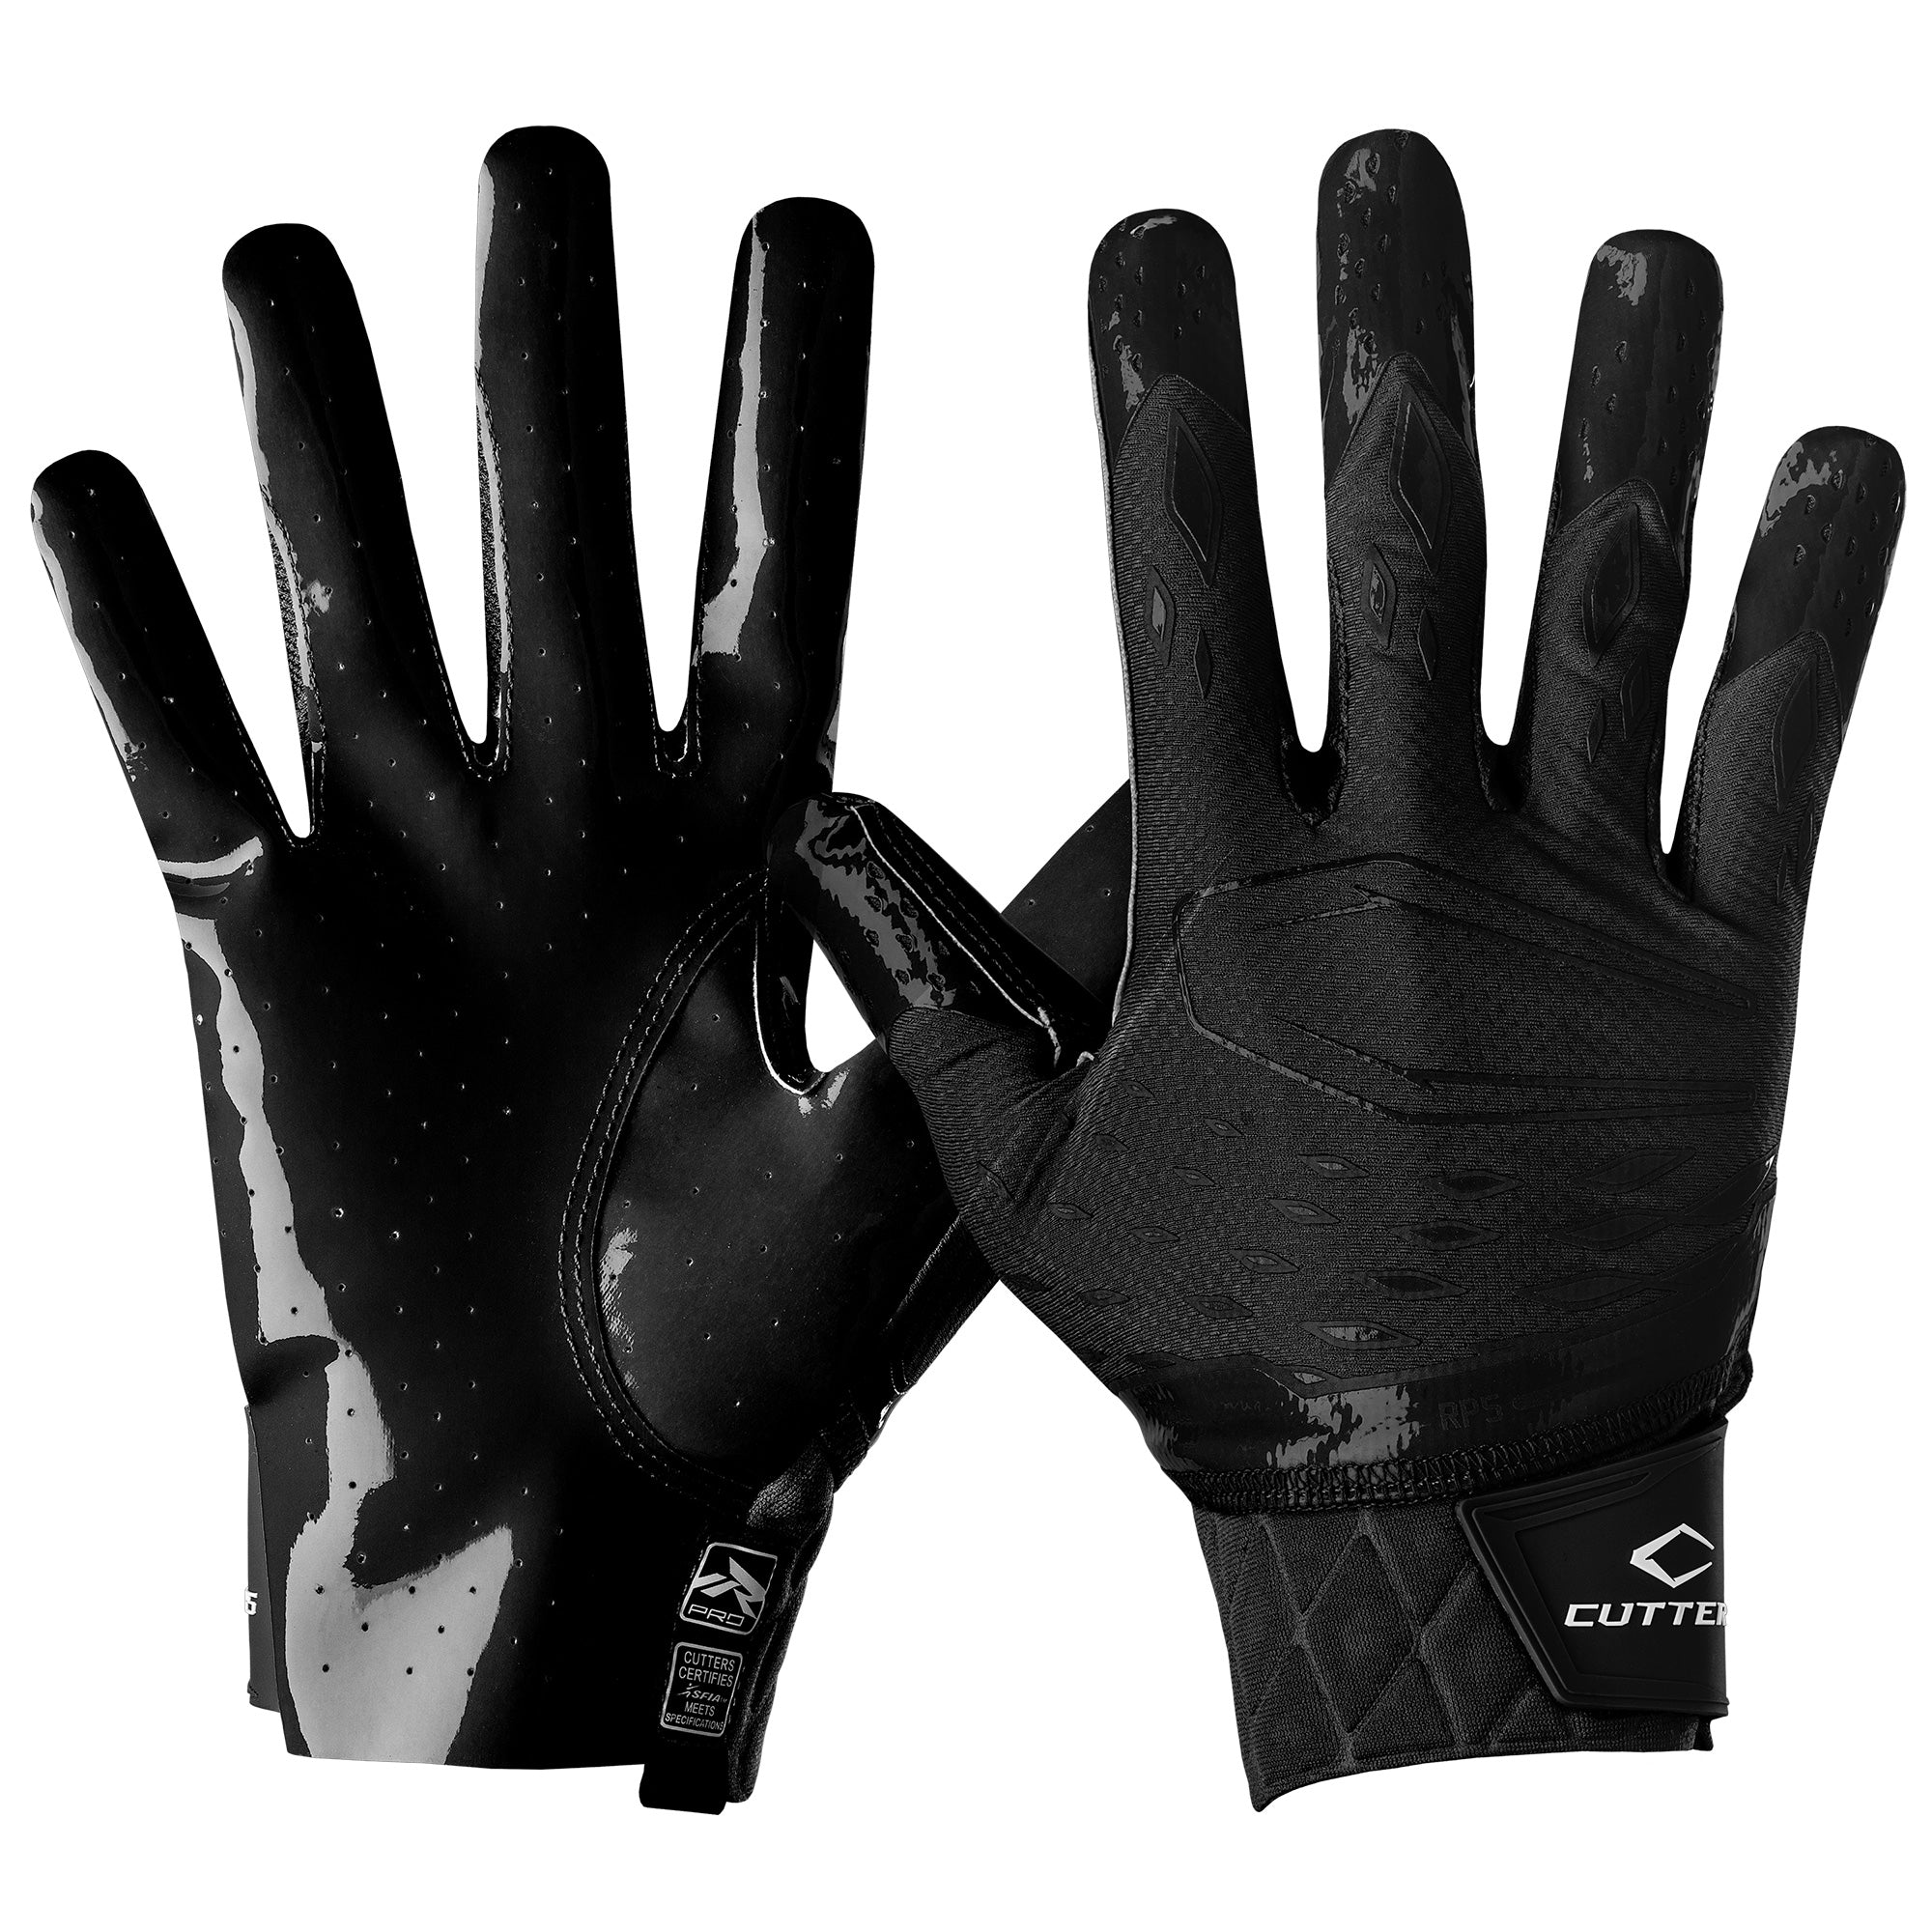 Cutters Football Gloves For Receivers, Quarterbacks, Lineman and